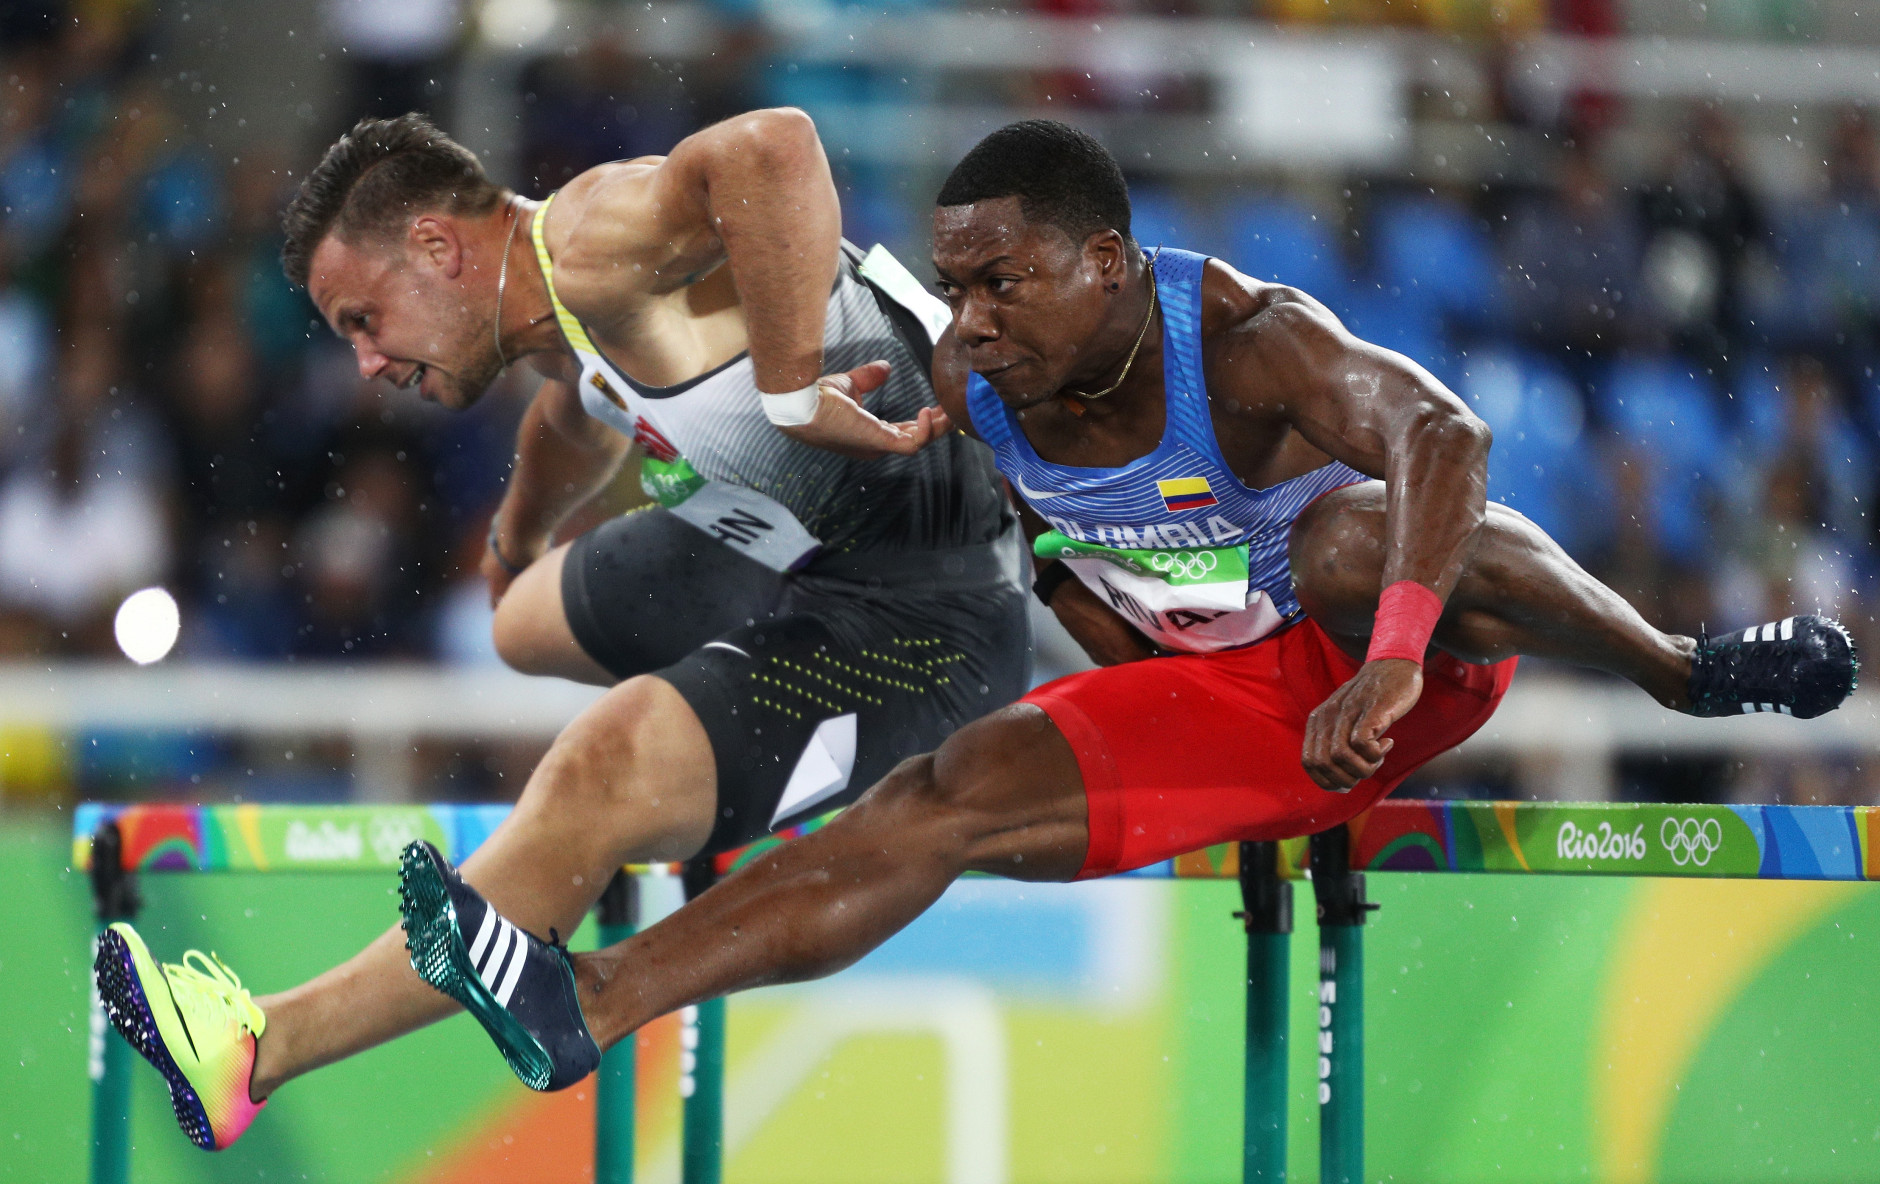 RIO DE JANEIRO, BRAZIL - AUGUST 15:  Alexander John of Germany (L) and Yeison Rivas of Colombia compete during the Men's 110m Hurdles Round 1 - Heat 1 on Day 10 of the Rio 2016 Olympic Games at the Olympic Stadium on August 15, 2016 in Rio de Janeiro, Brazil.  (Photo by Paul Gilham/Getty Images)